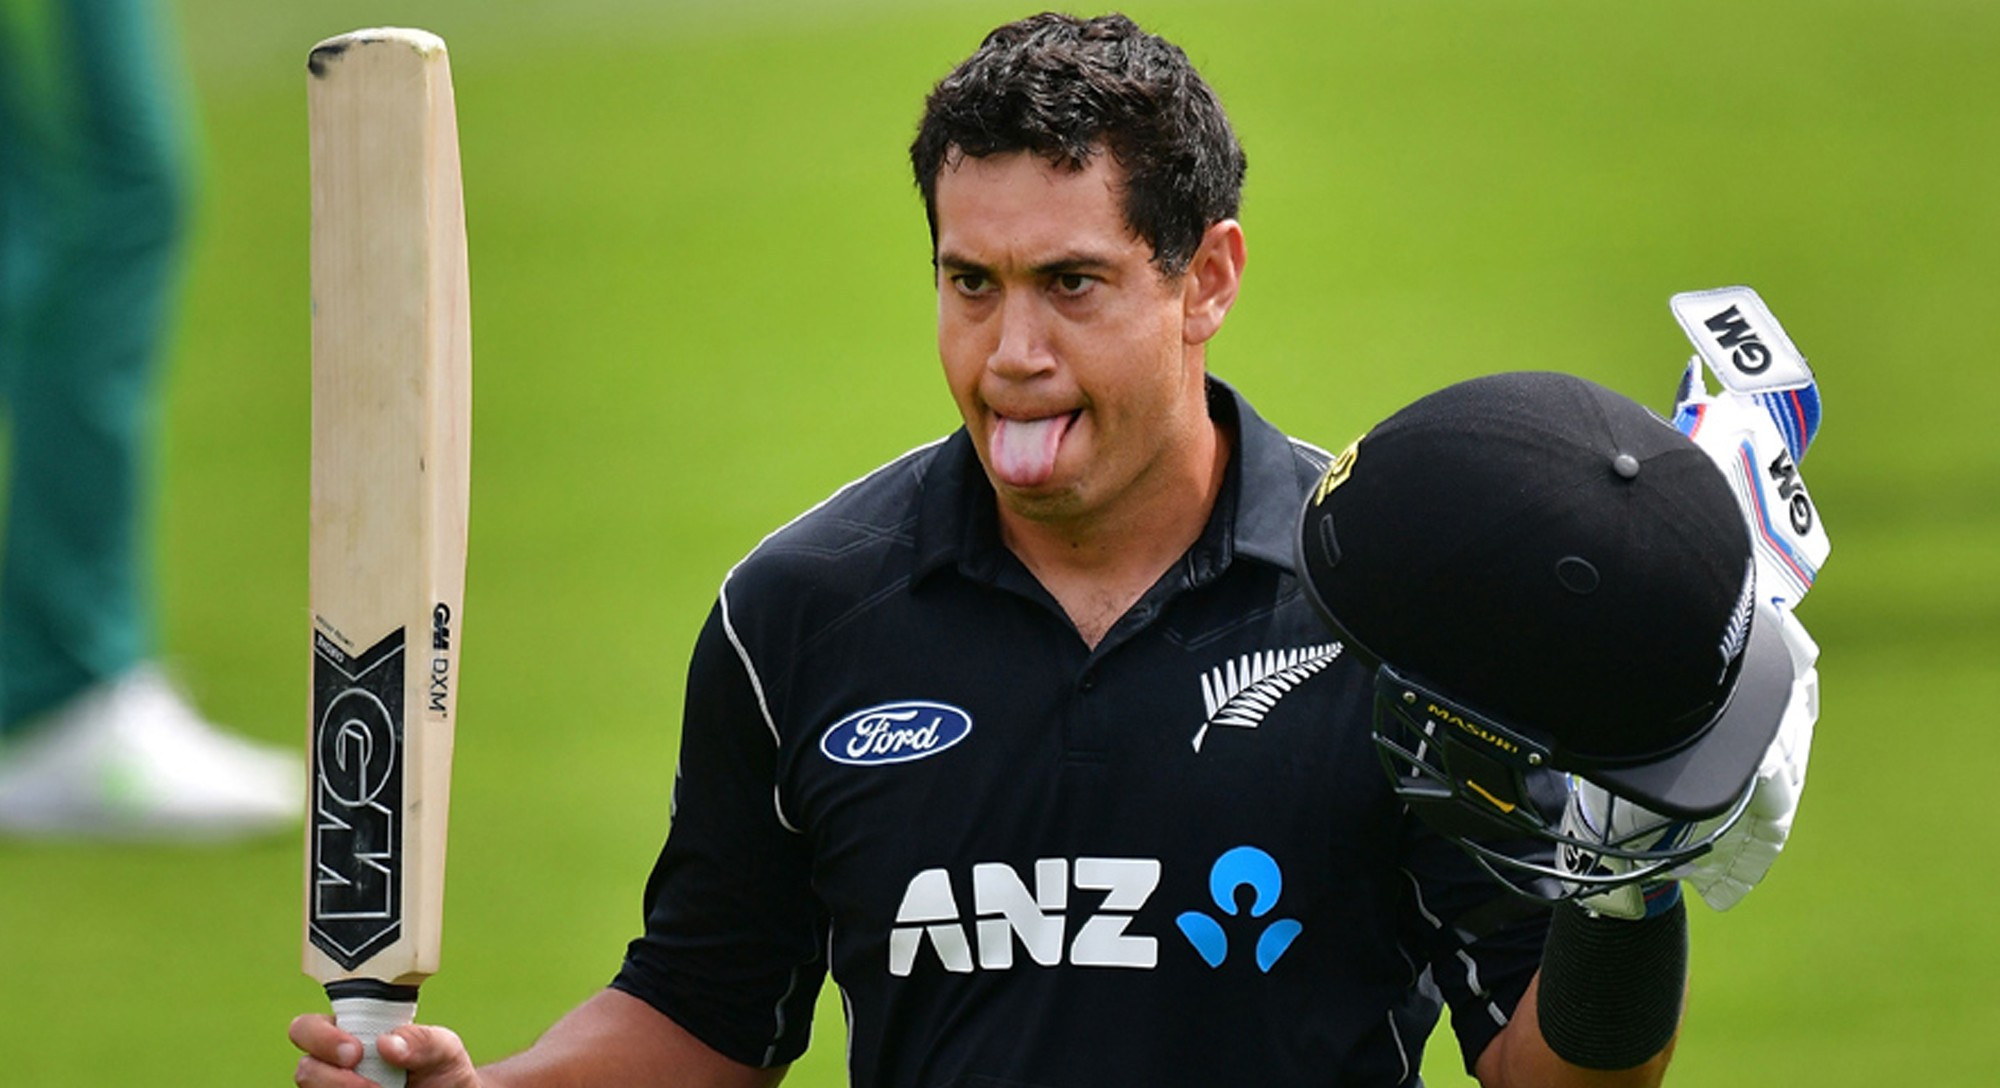 Cricket Pakistan | Ross Taylor in hot water after complaining about Hafeez’s bowling ...